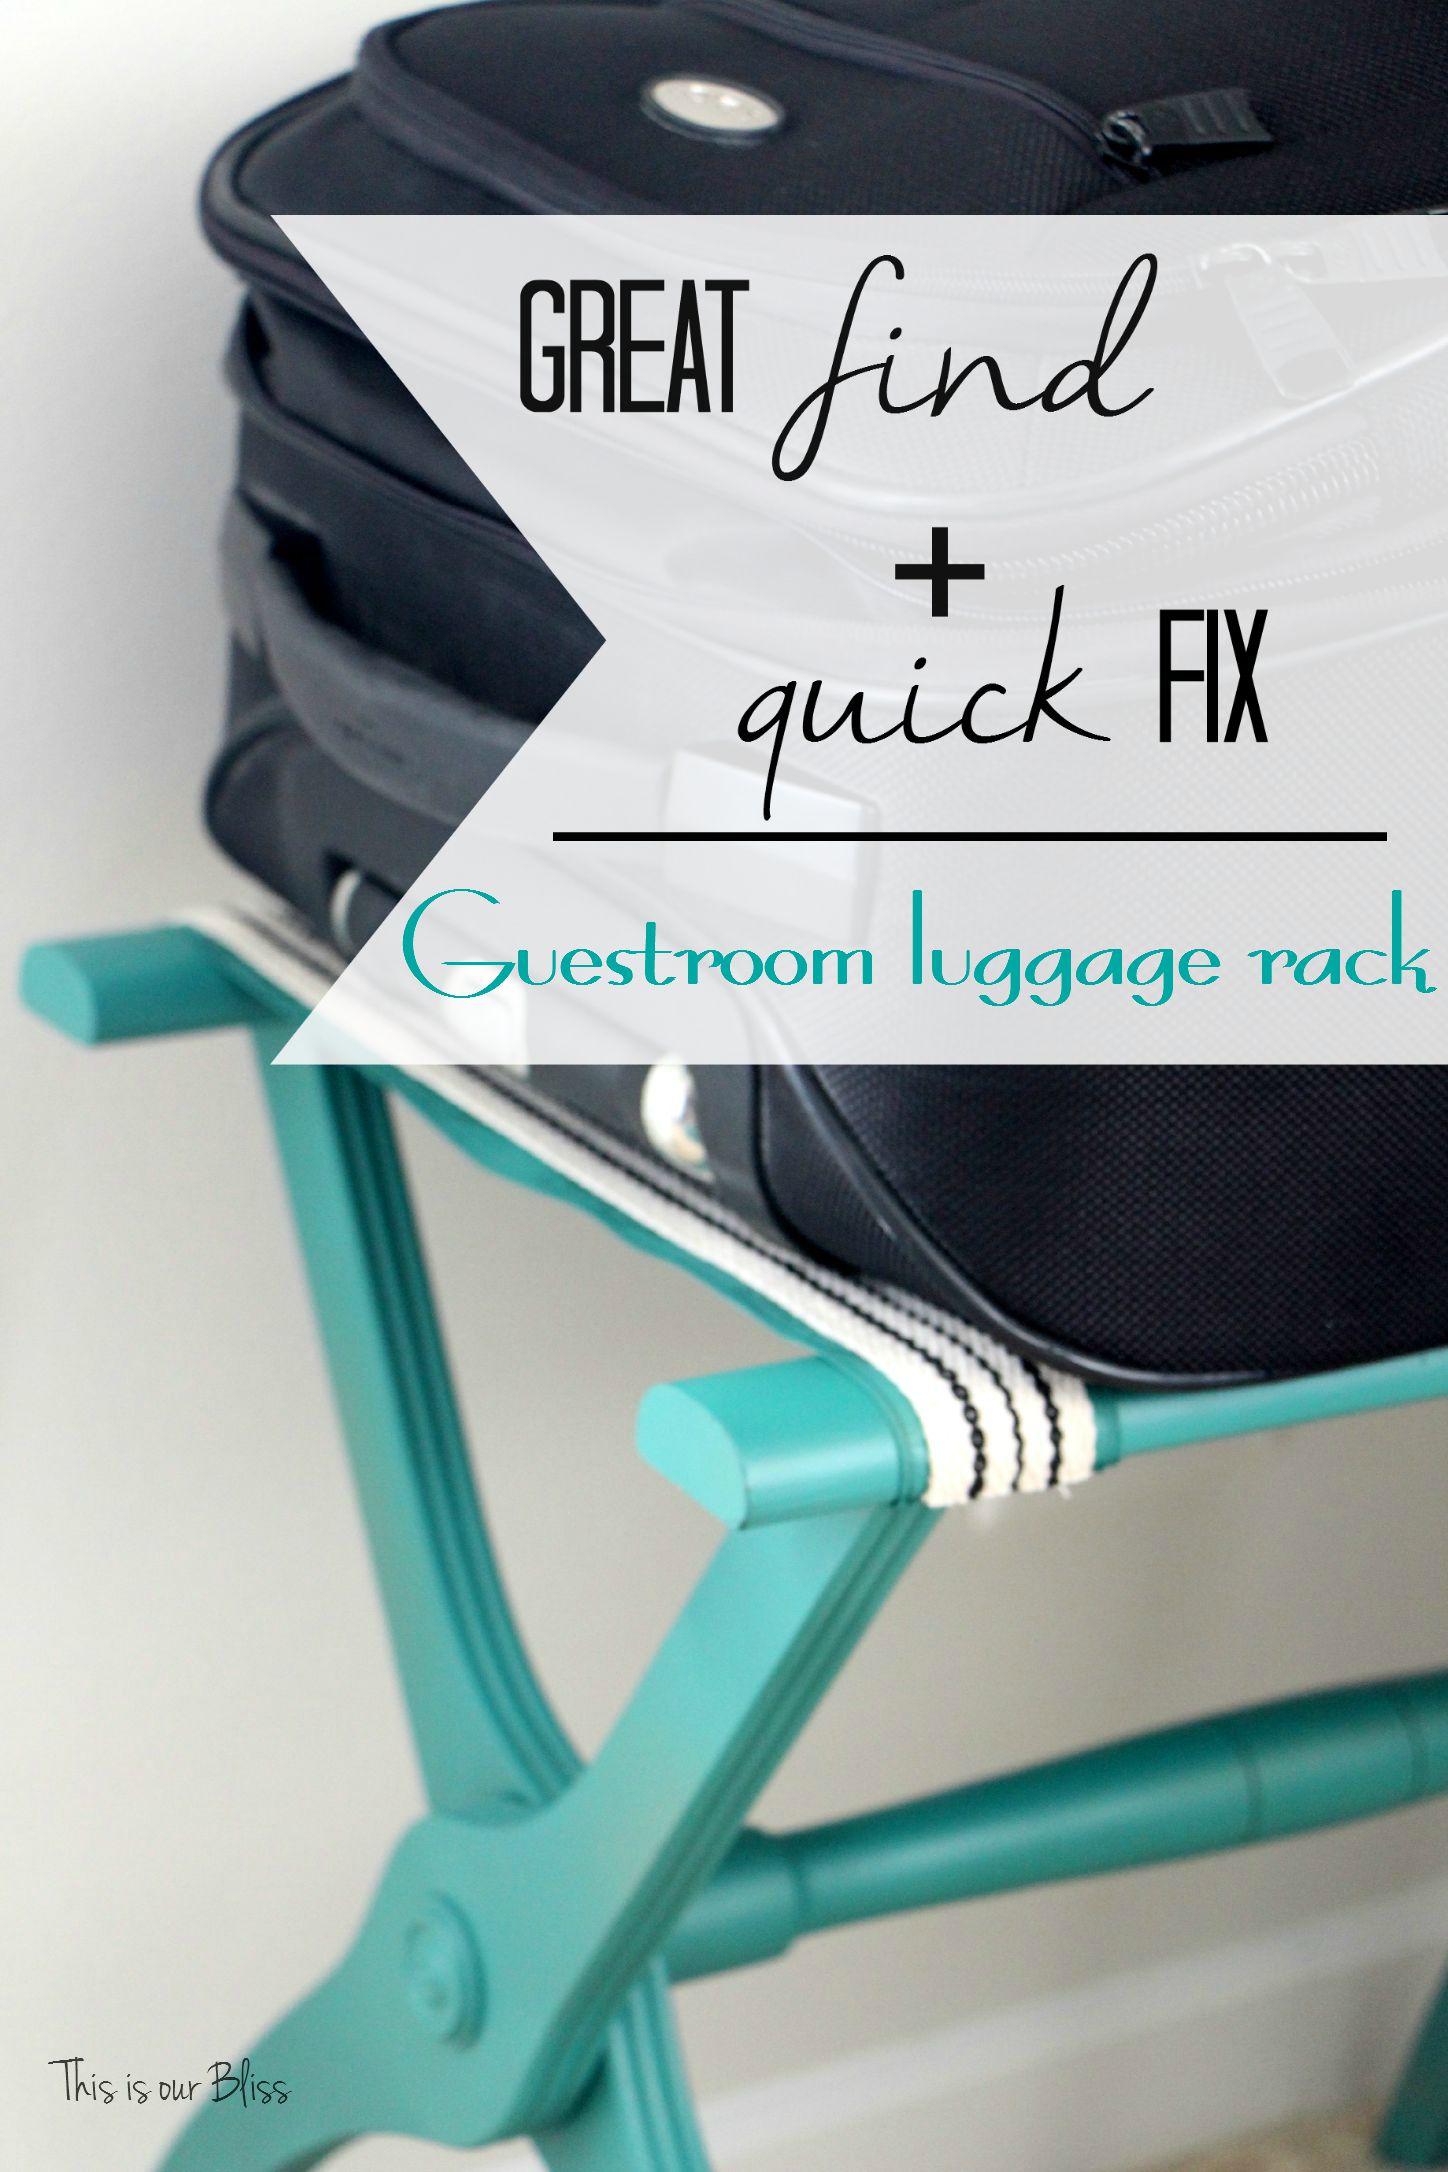 luggage rack makeover - great find + quick fix - guestroom luggage rack - guestroom revamp - This is our bliss